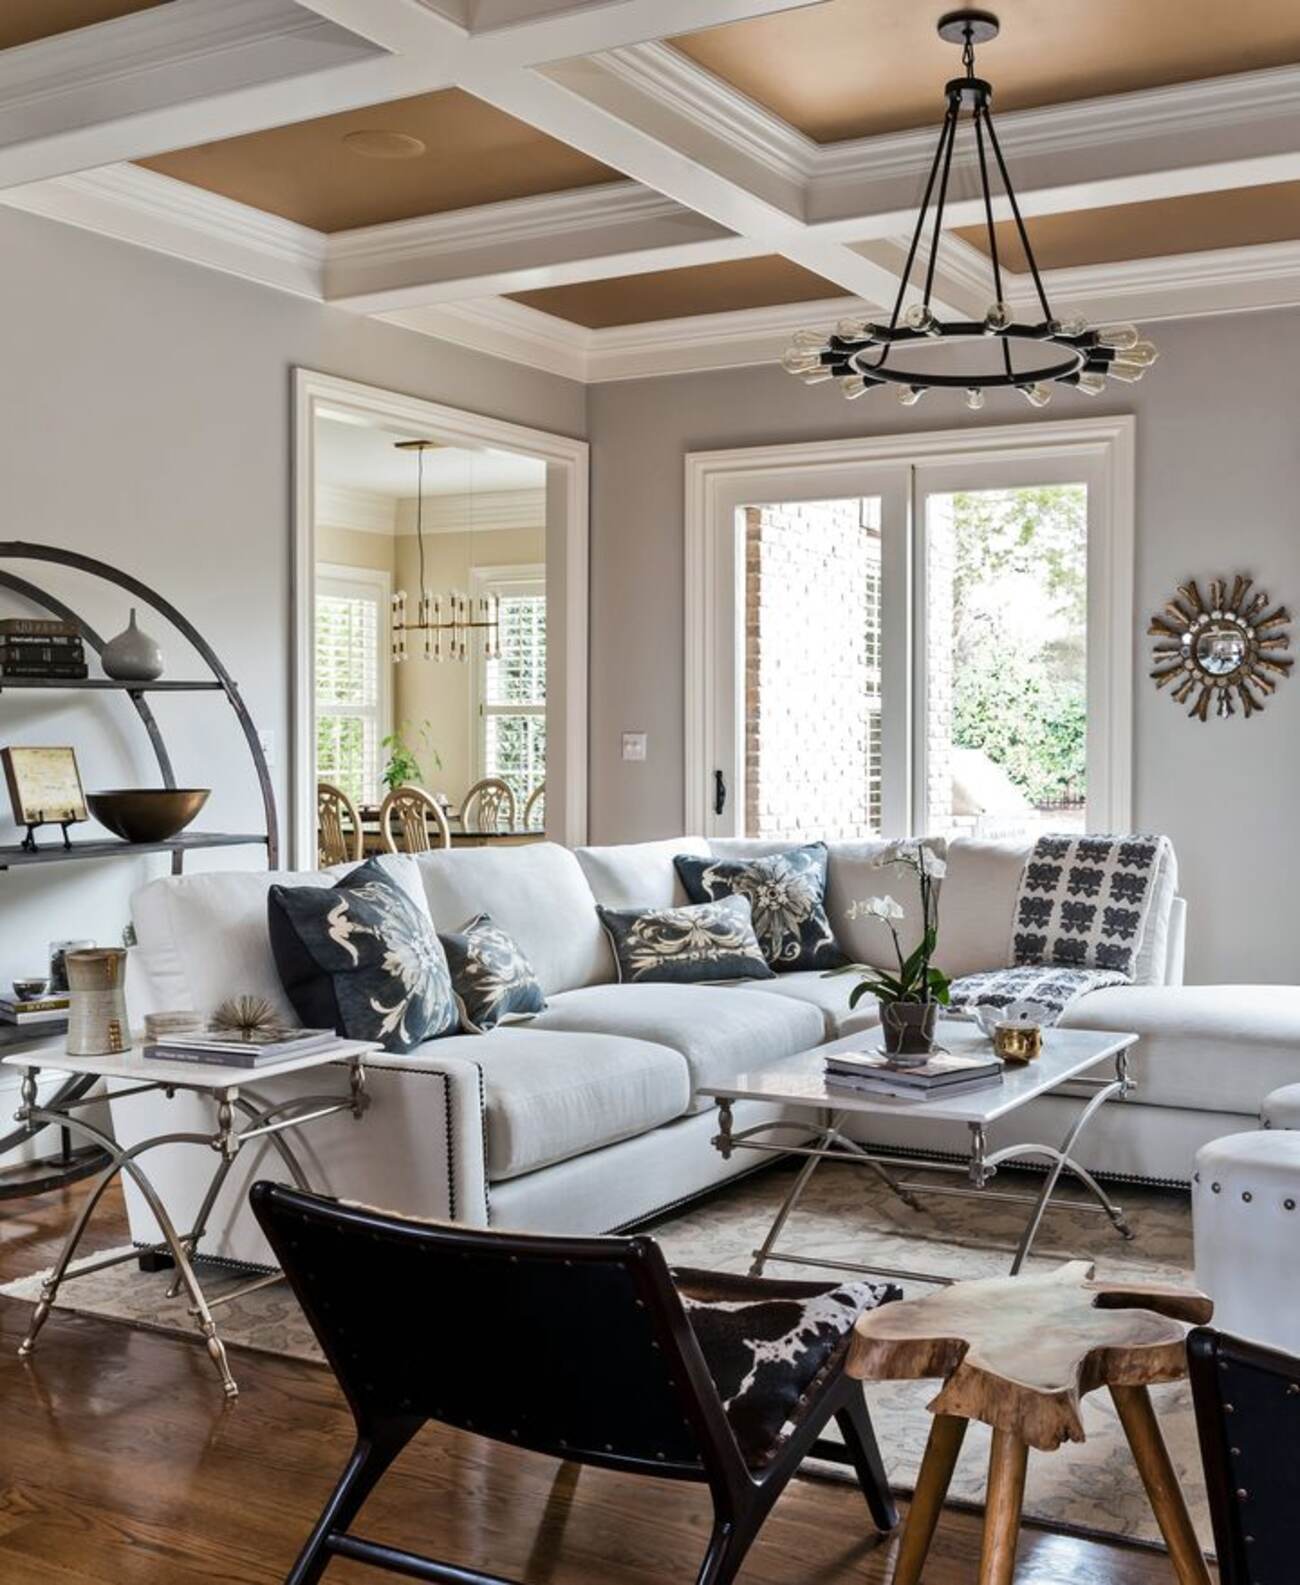 A chic living room with elegant white furniture and a stunning chandelier hanging from the ceiling